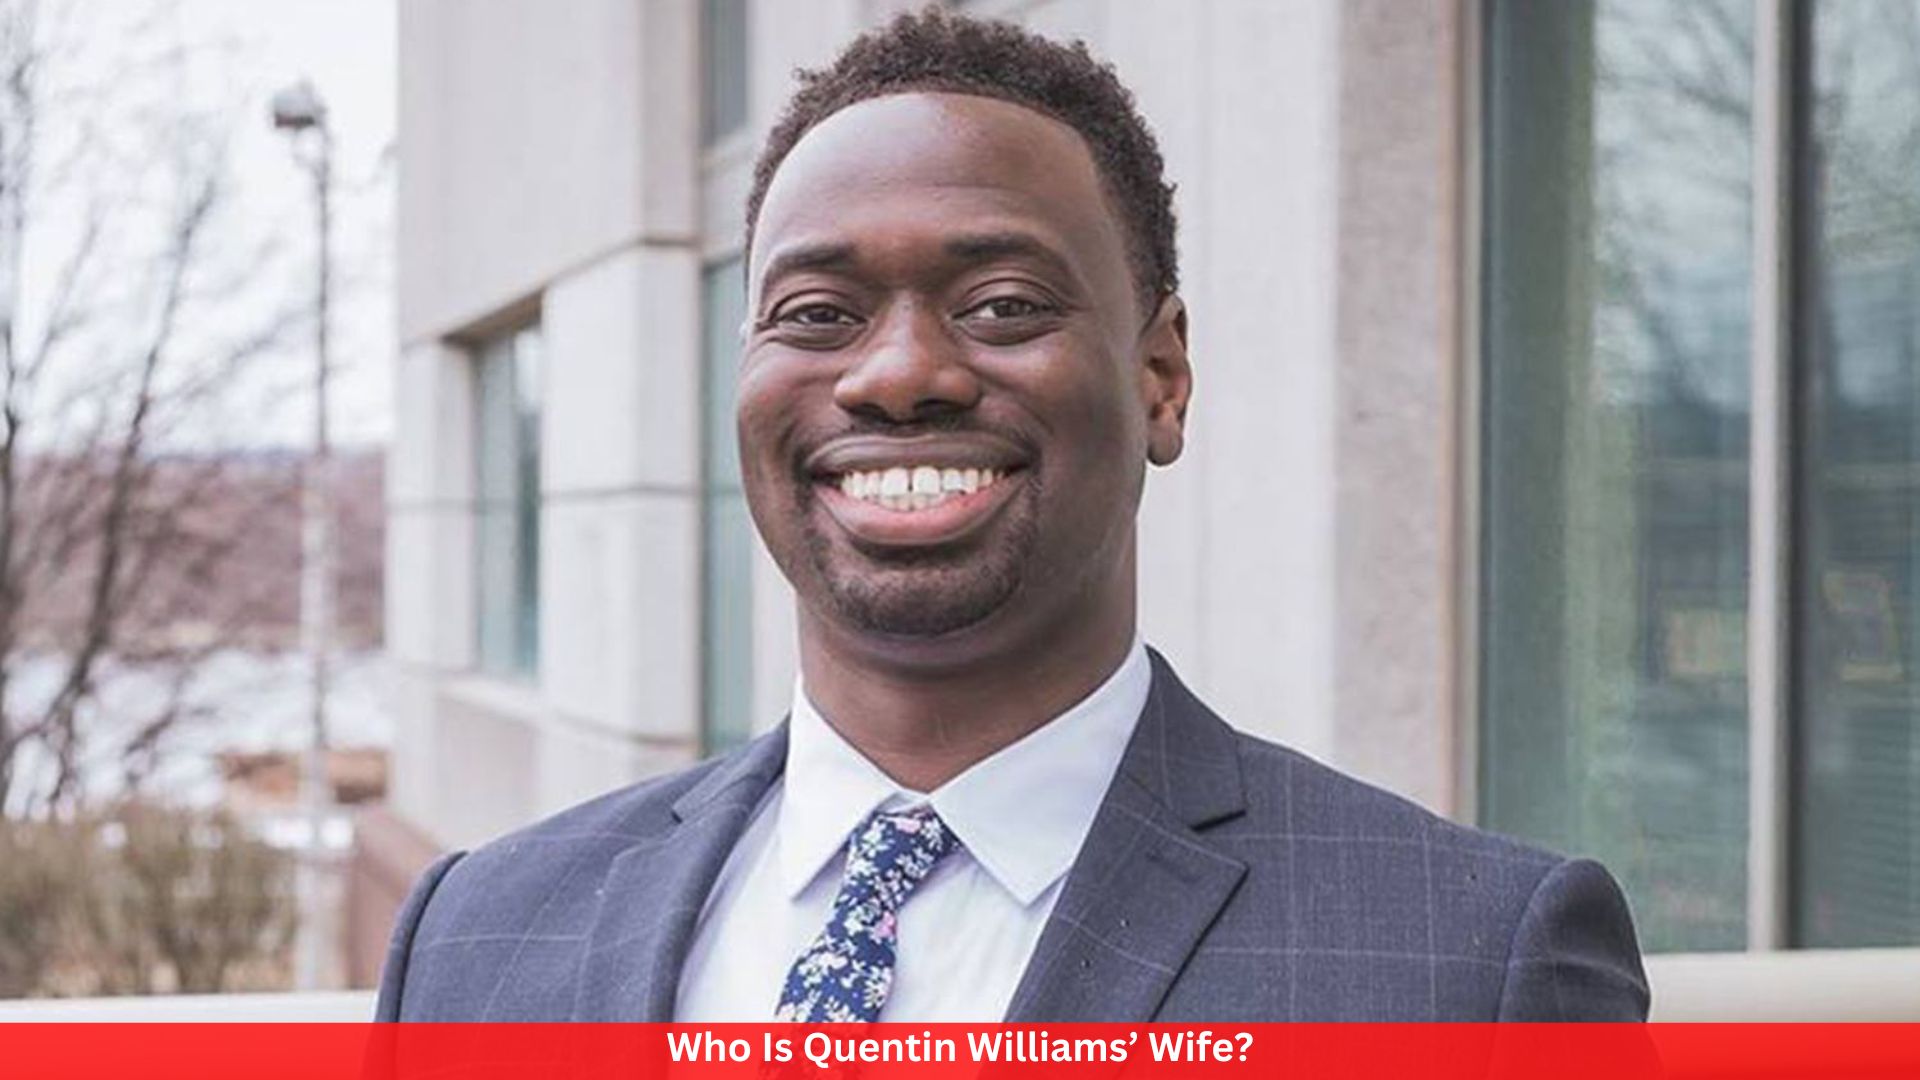 Who Is Quentin Williams’ Wife?